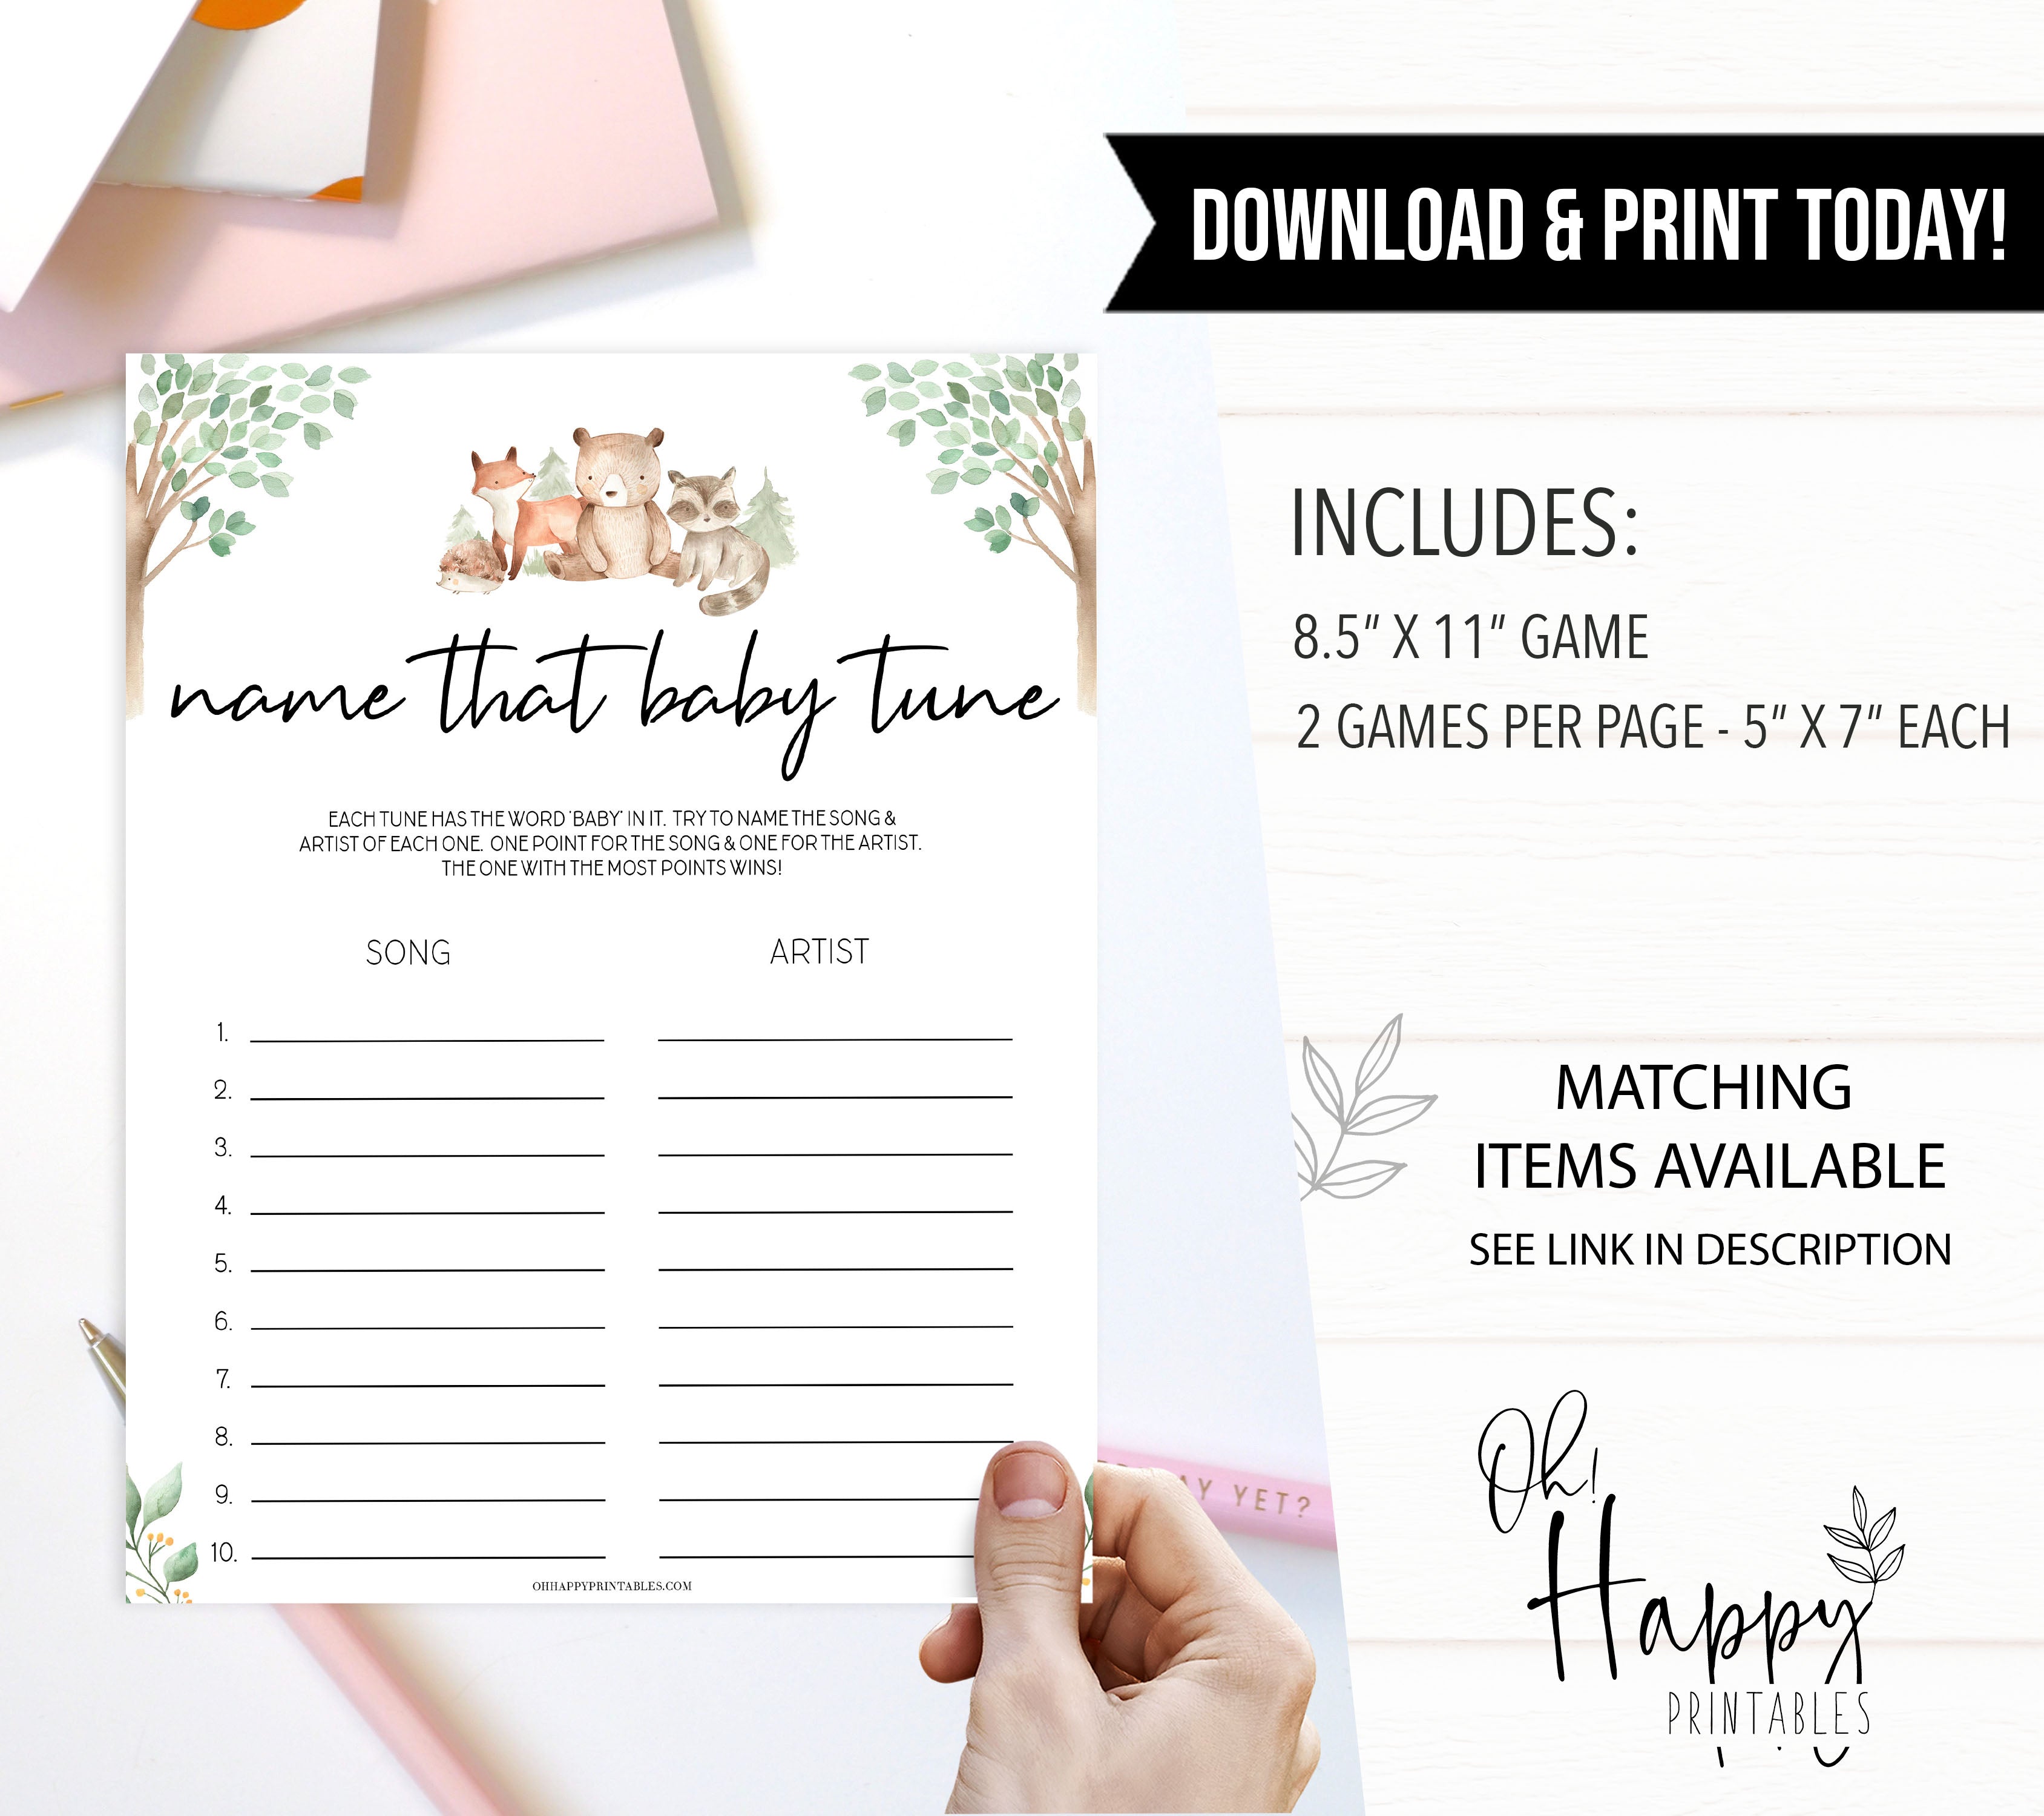 name that baby tune game, Printable baby shower games, woodland animals baby games, baby shower games, fun baby shower ideas, top baby shower ideas, woodland baby shower, baby shower games, fun woodland animals baby shower ideas